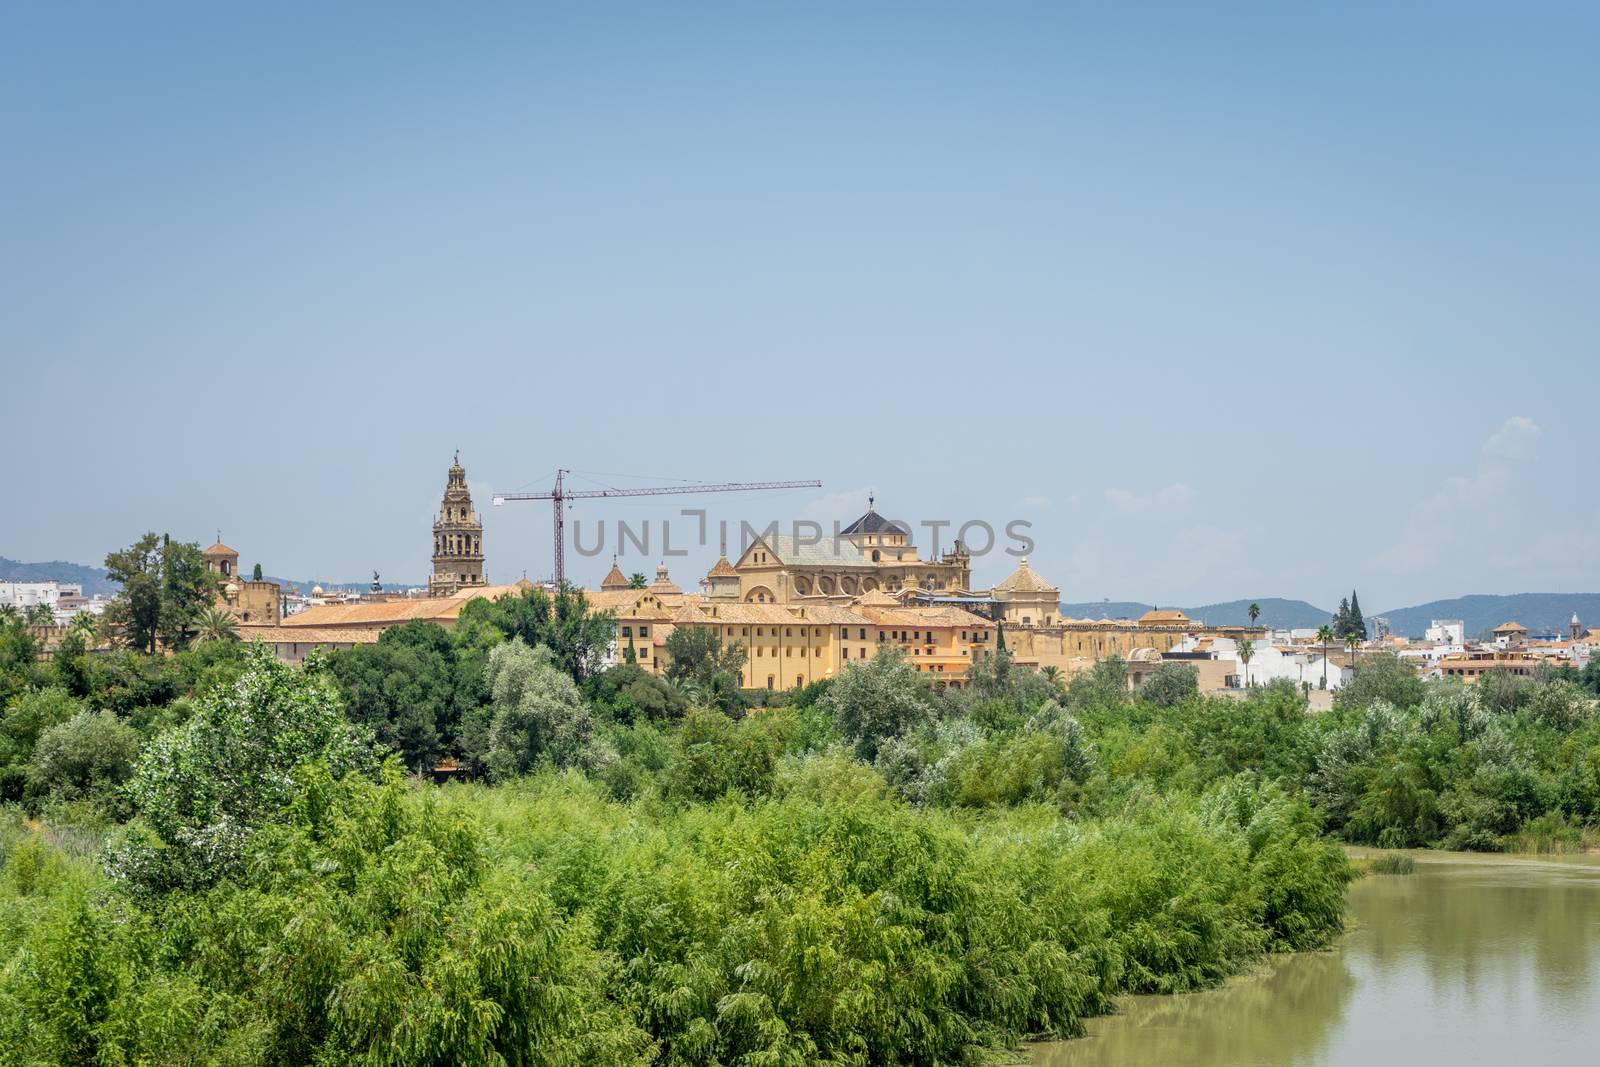 The bell tower and Mezquita de Córdoba,the Great Mosque of Córdoba, Mosque-Cathedral,Mezquita from the bridge on river Guadalquivir